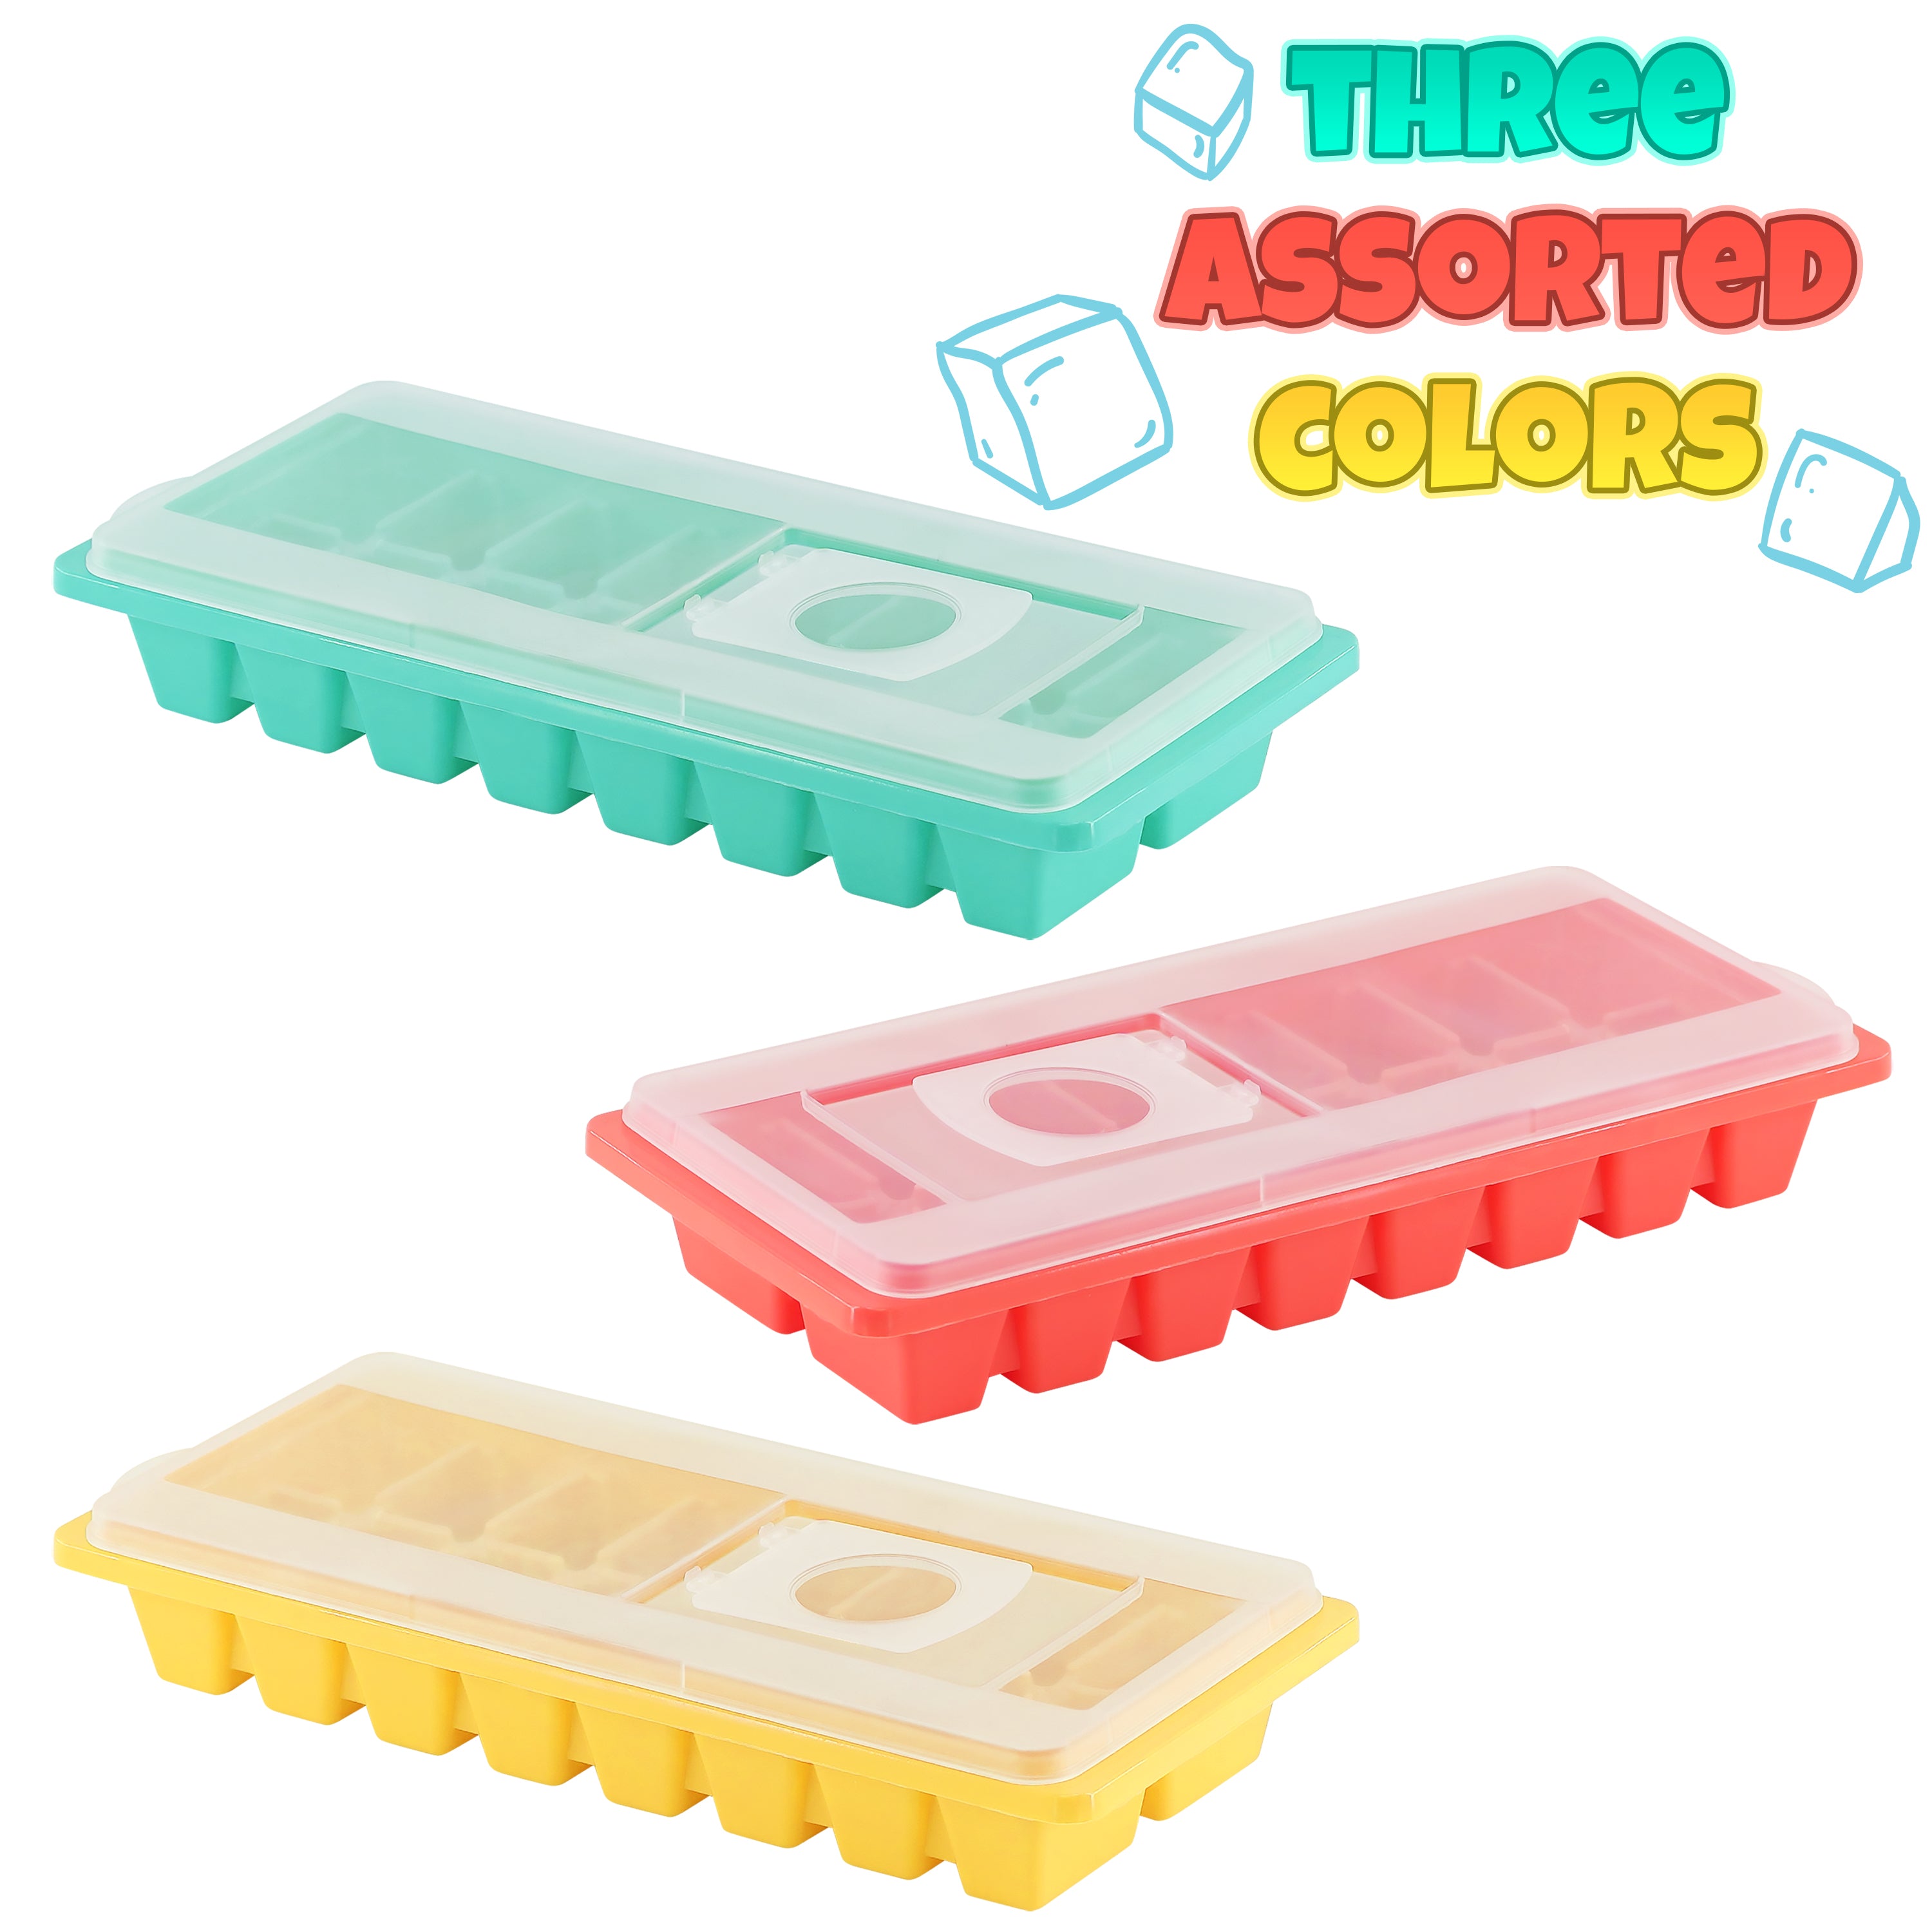 GEEZY Kitchen 16 Cubes Ice Cube Tray With Lid